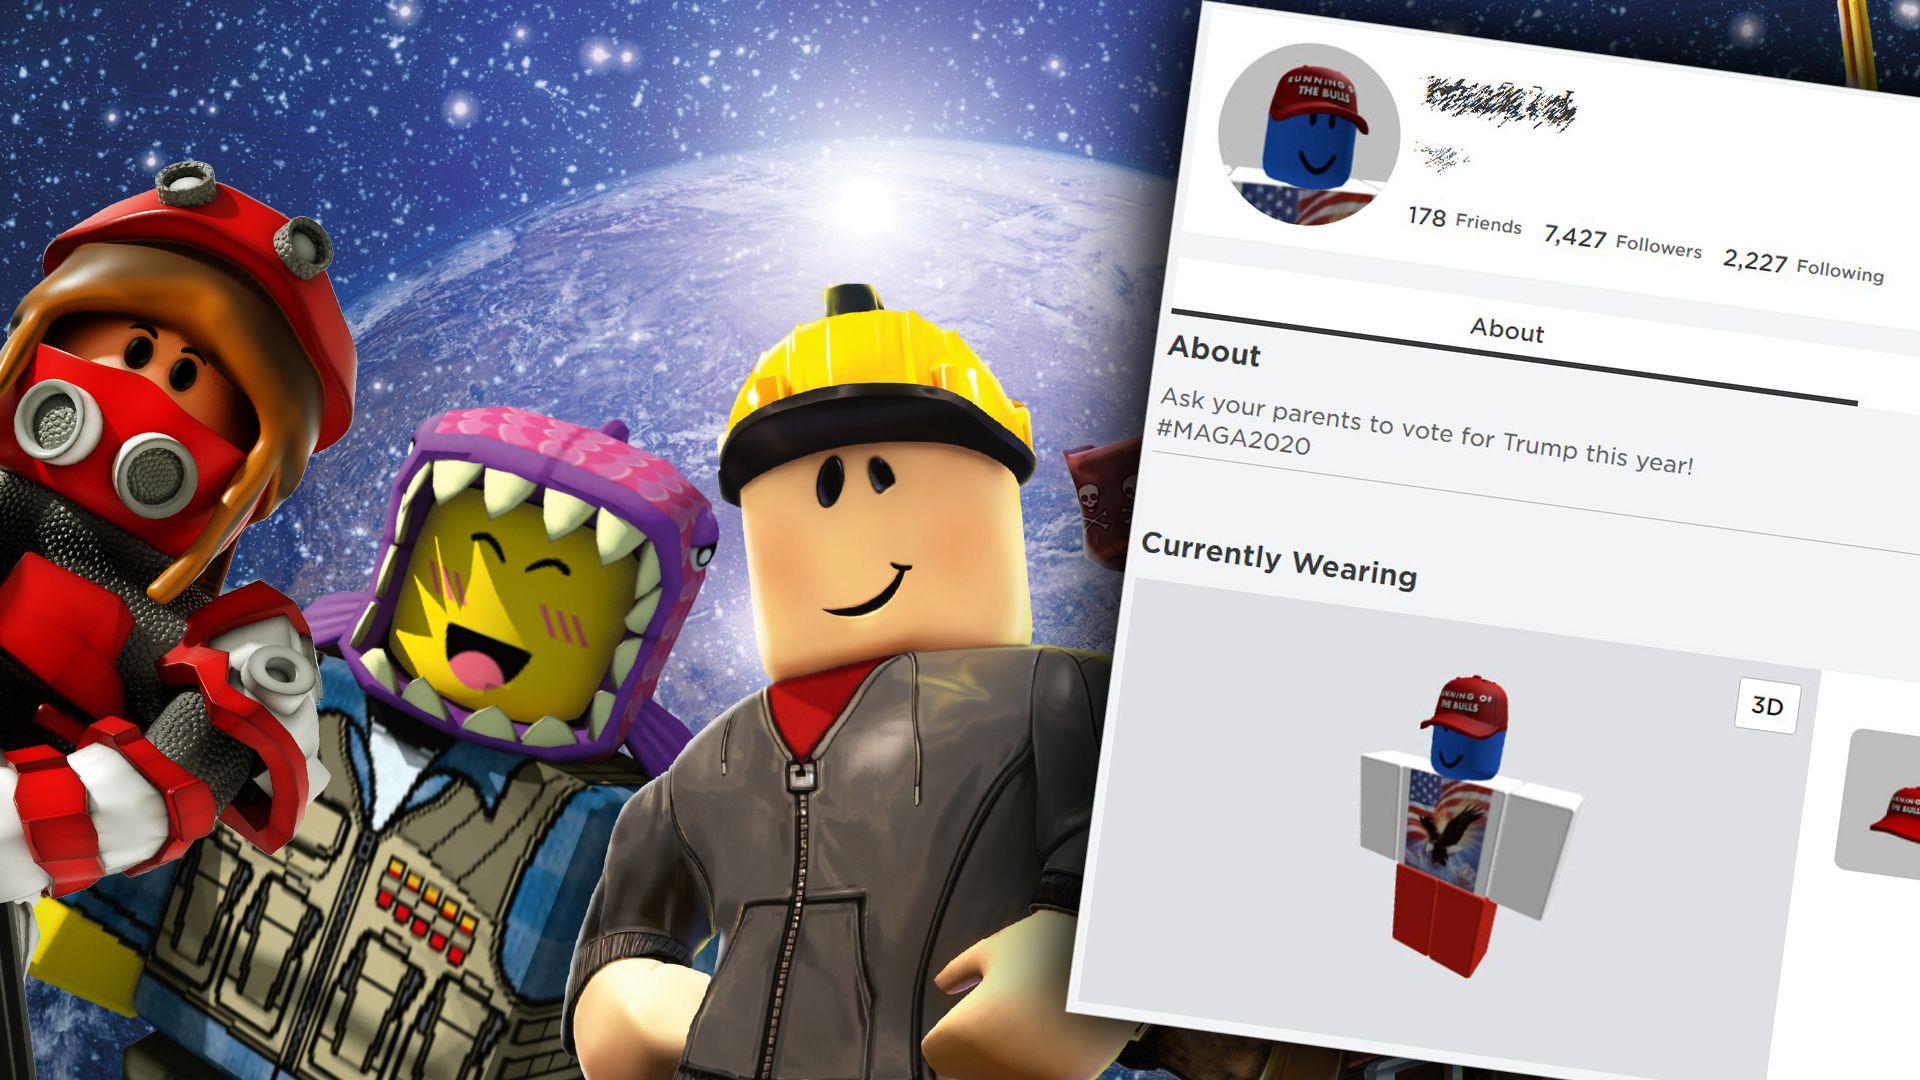 Attackers hack Roblox accounts and urge to vote for Trump